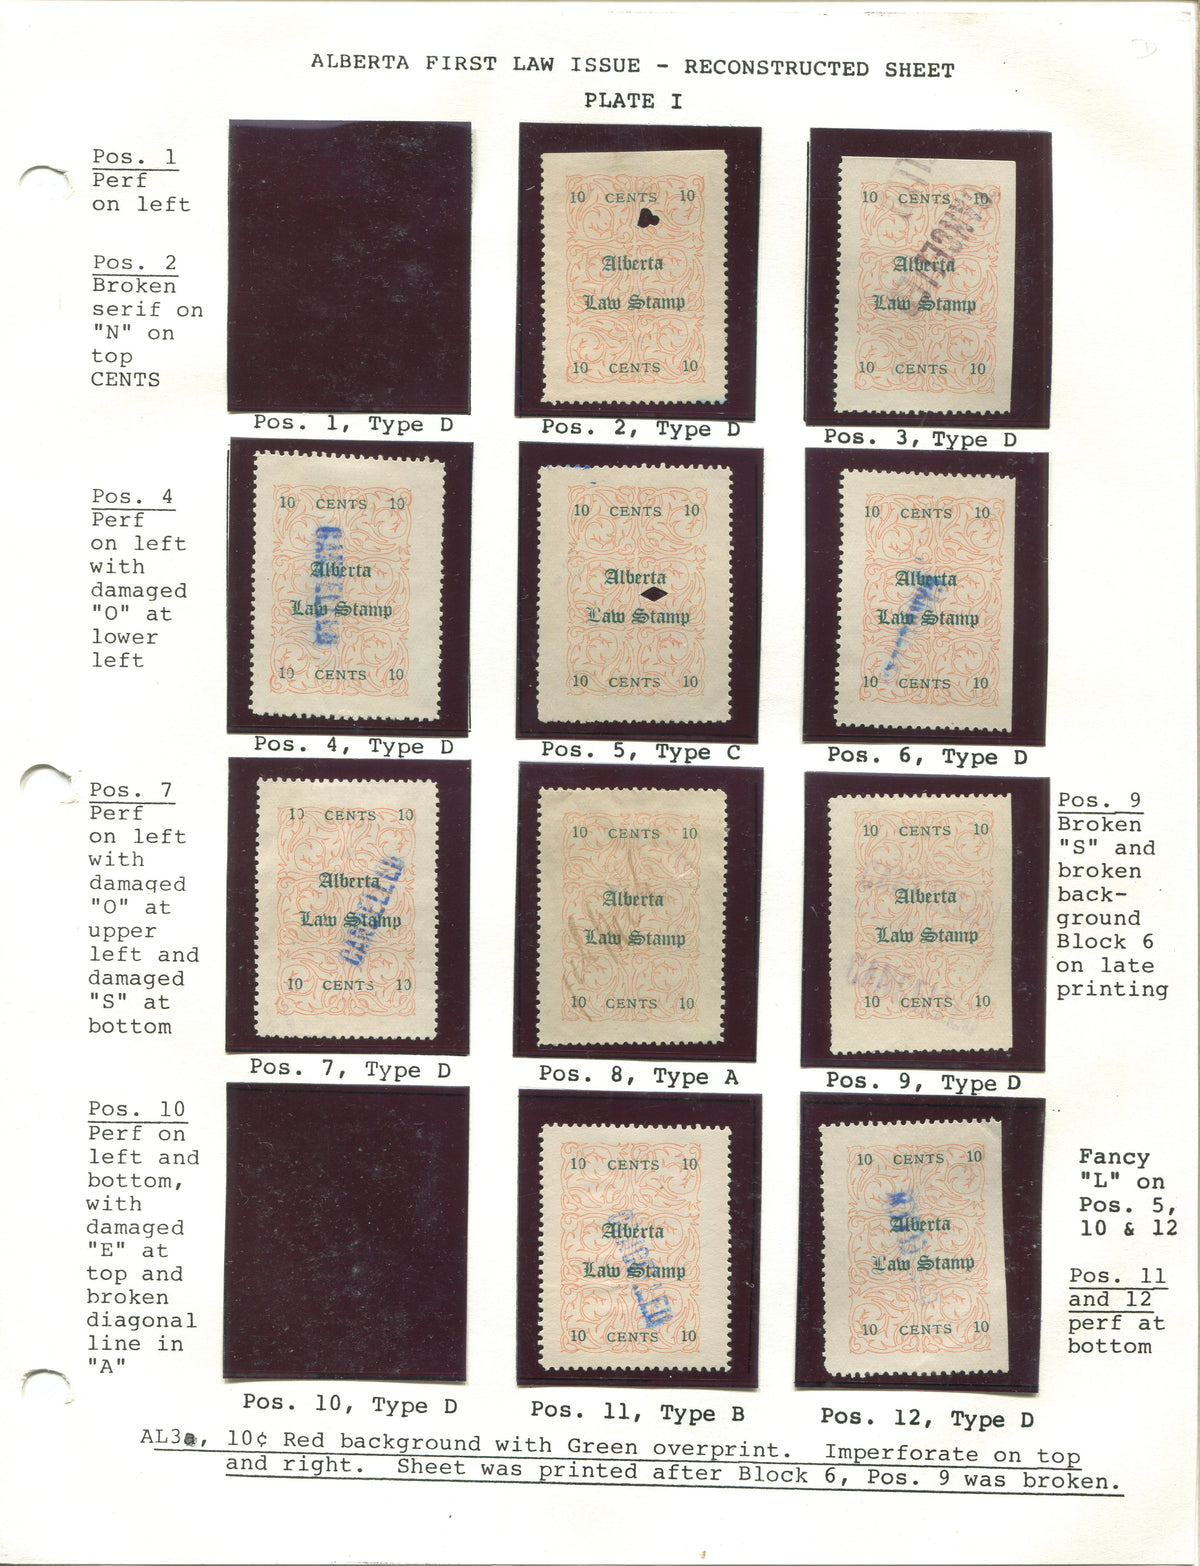 0003AL2010 - AL3 - Used Partially Reconstructed Sheet